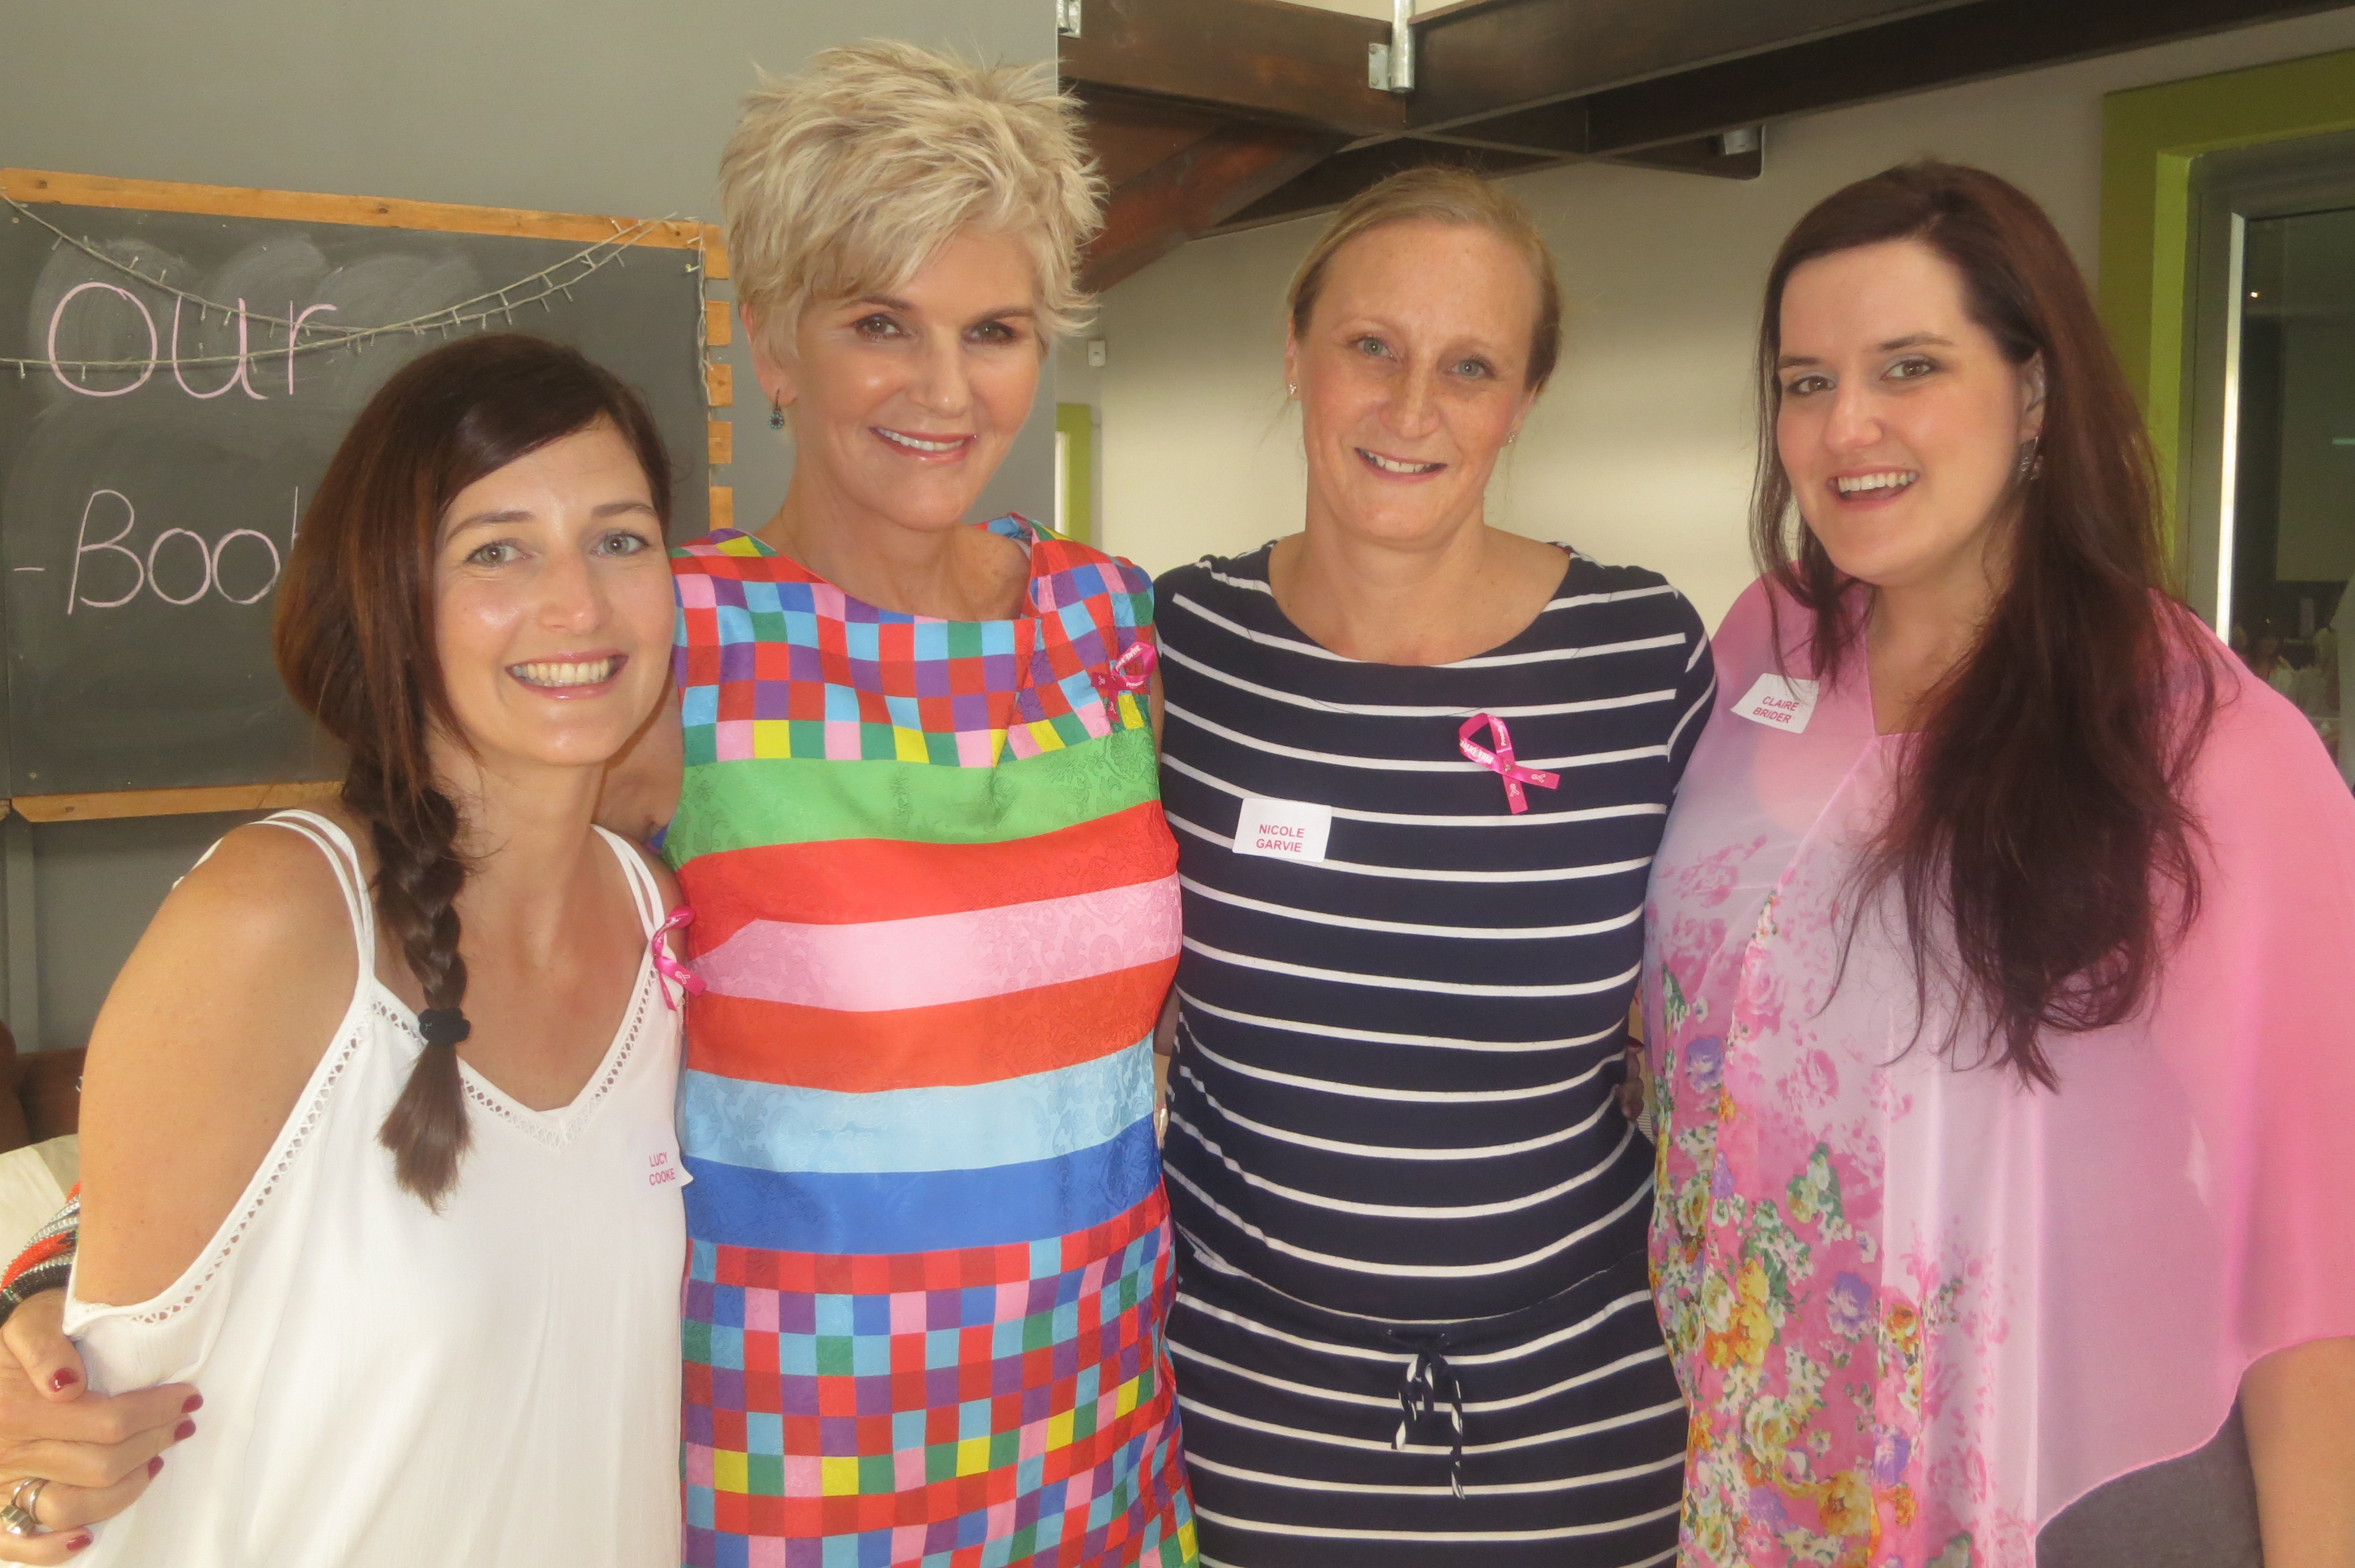 Lucy Cooke, PJ Powers, Nicole Garvie and Clair Brider